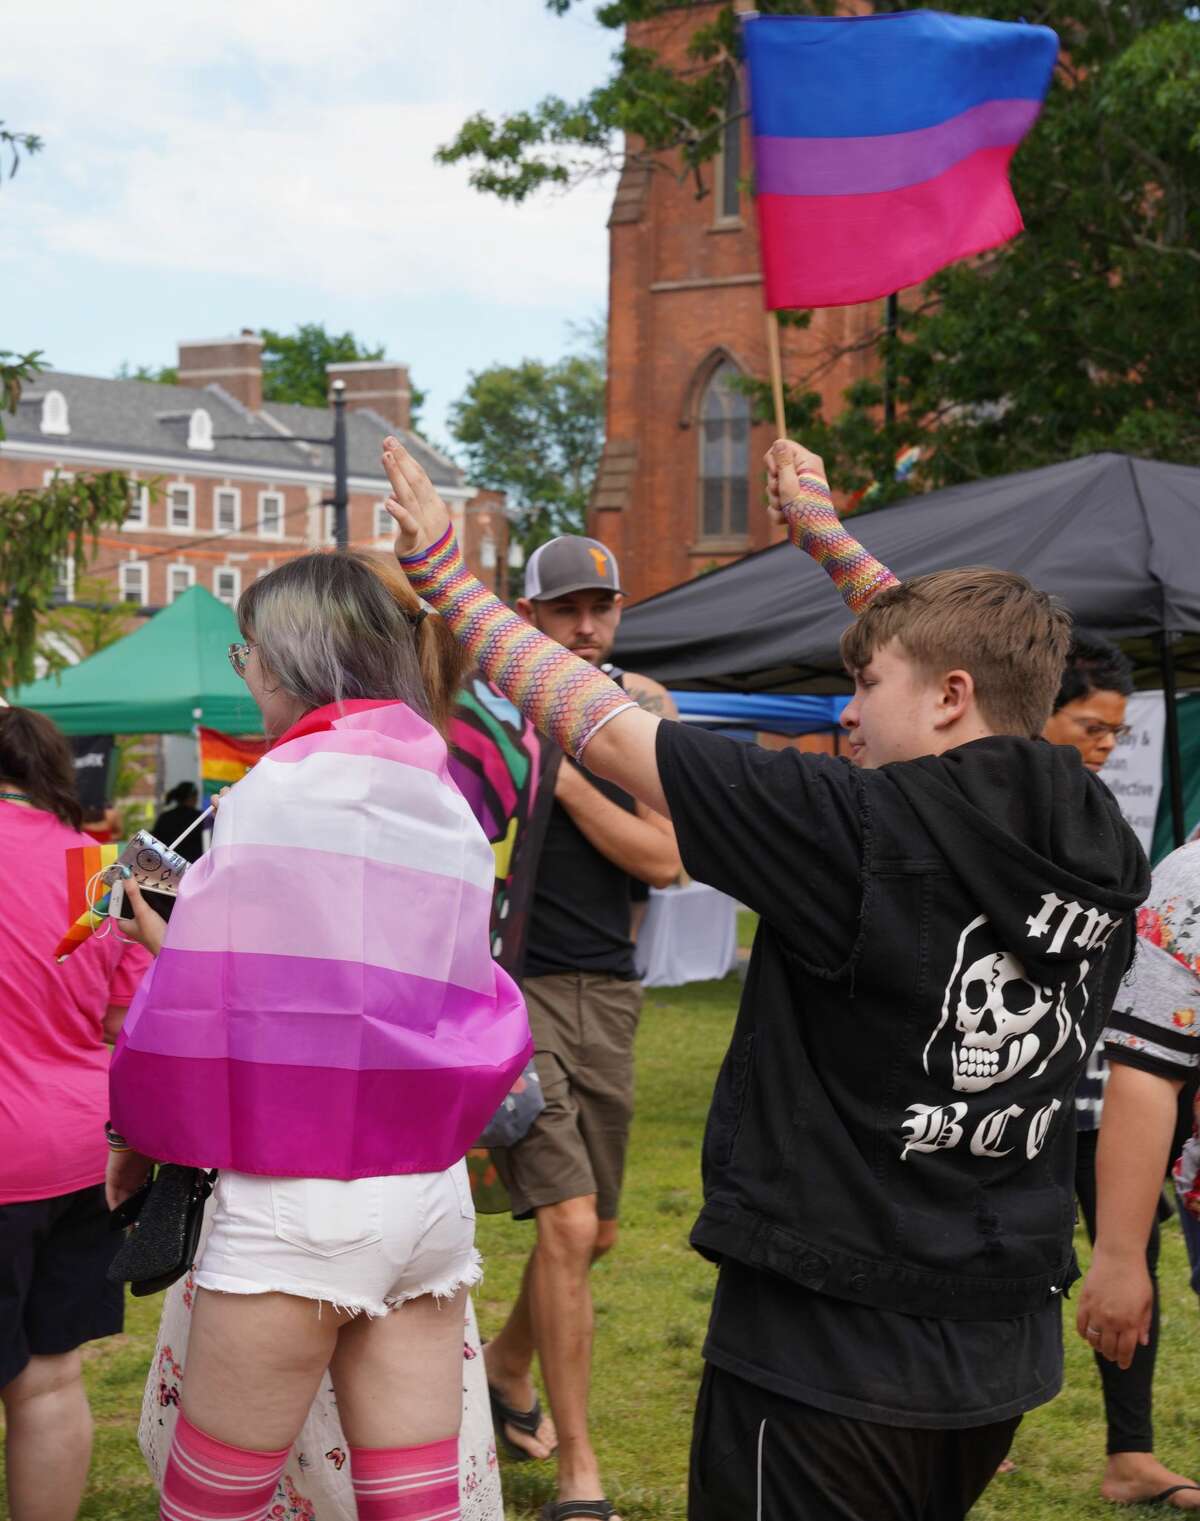 Celebrate Pride month in Connecticut this year with drag queens